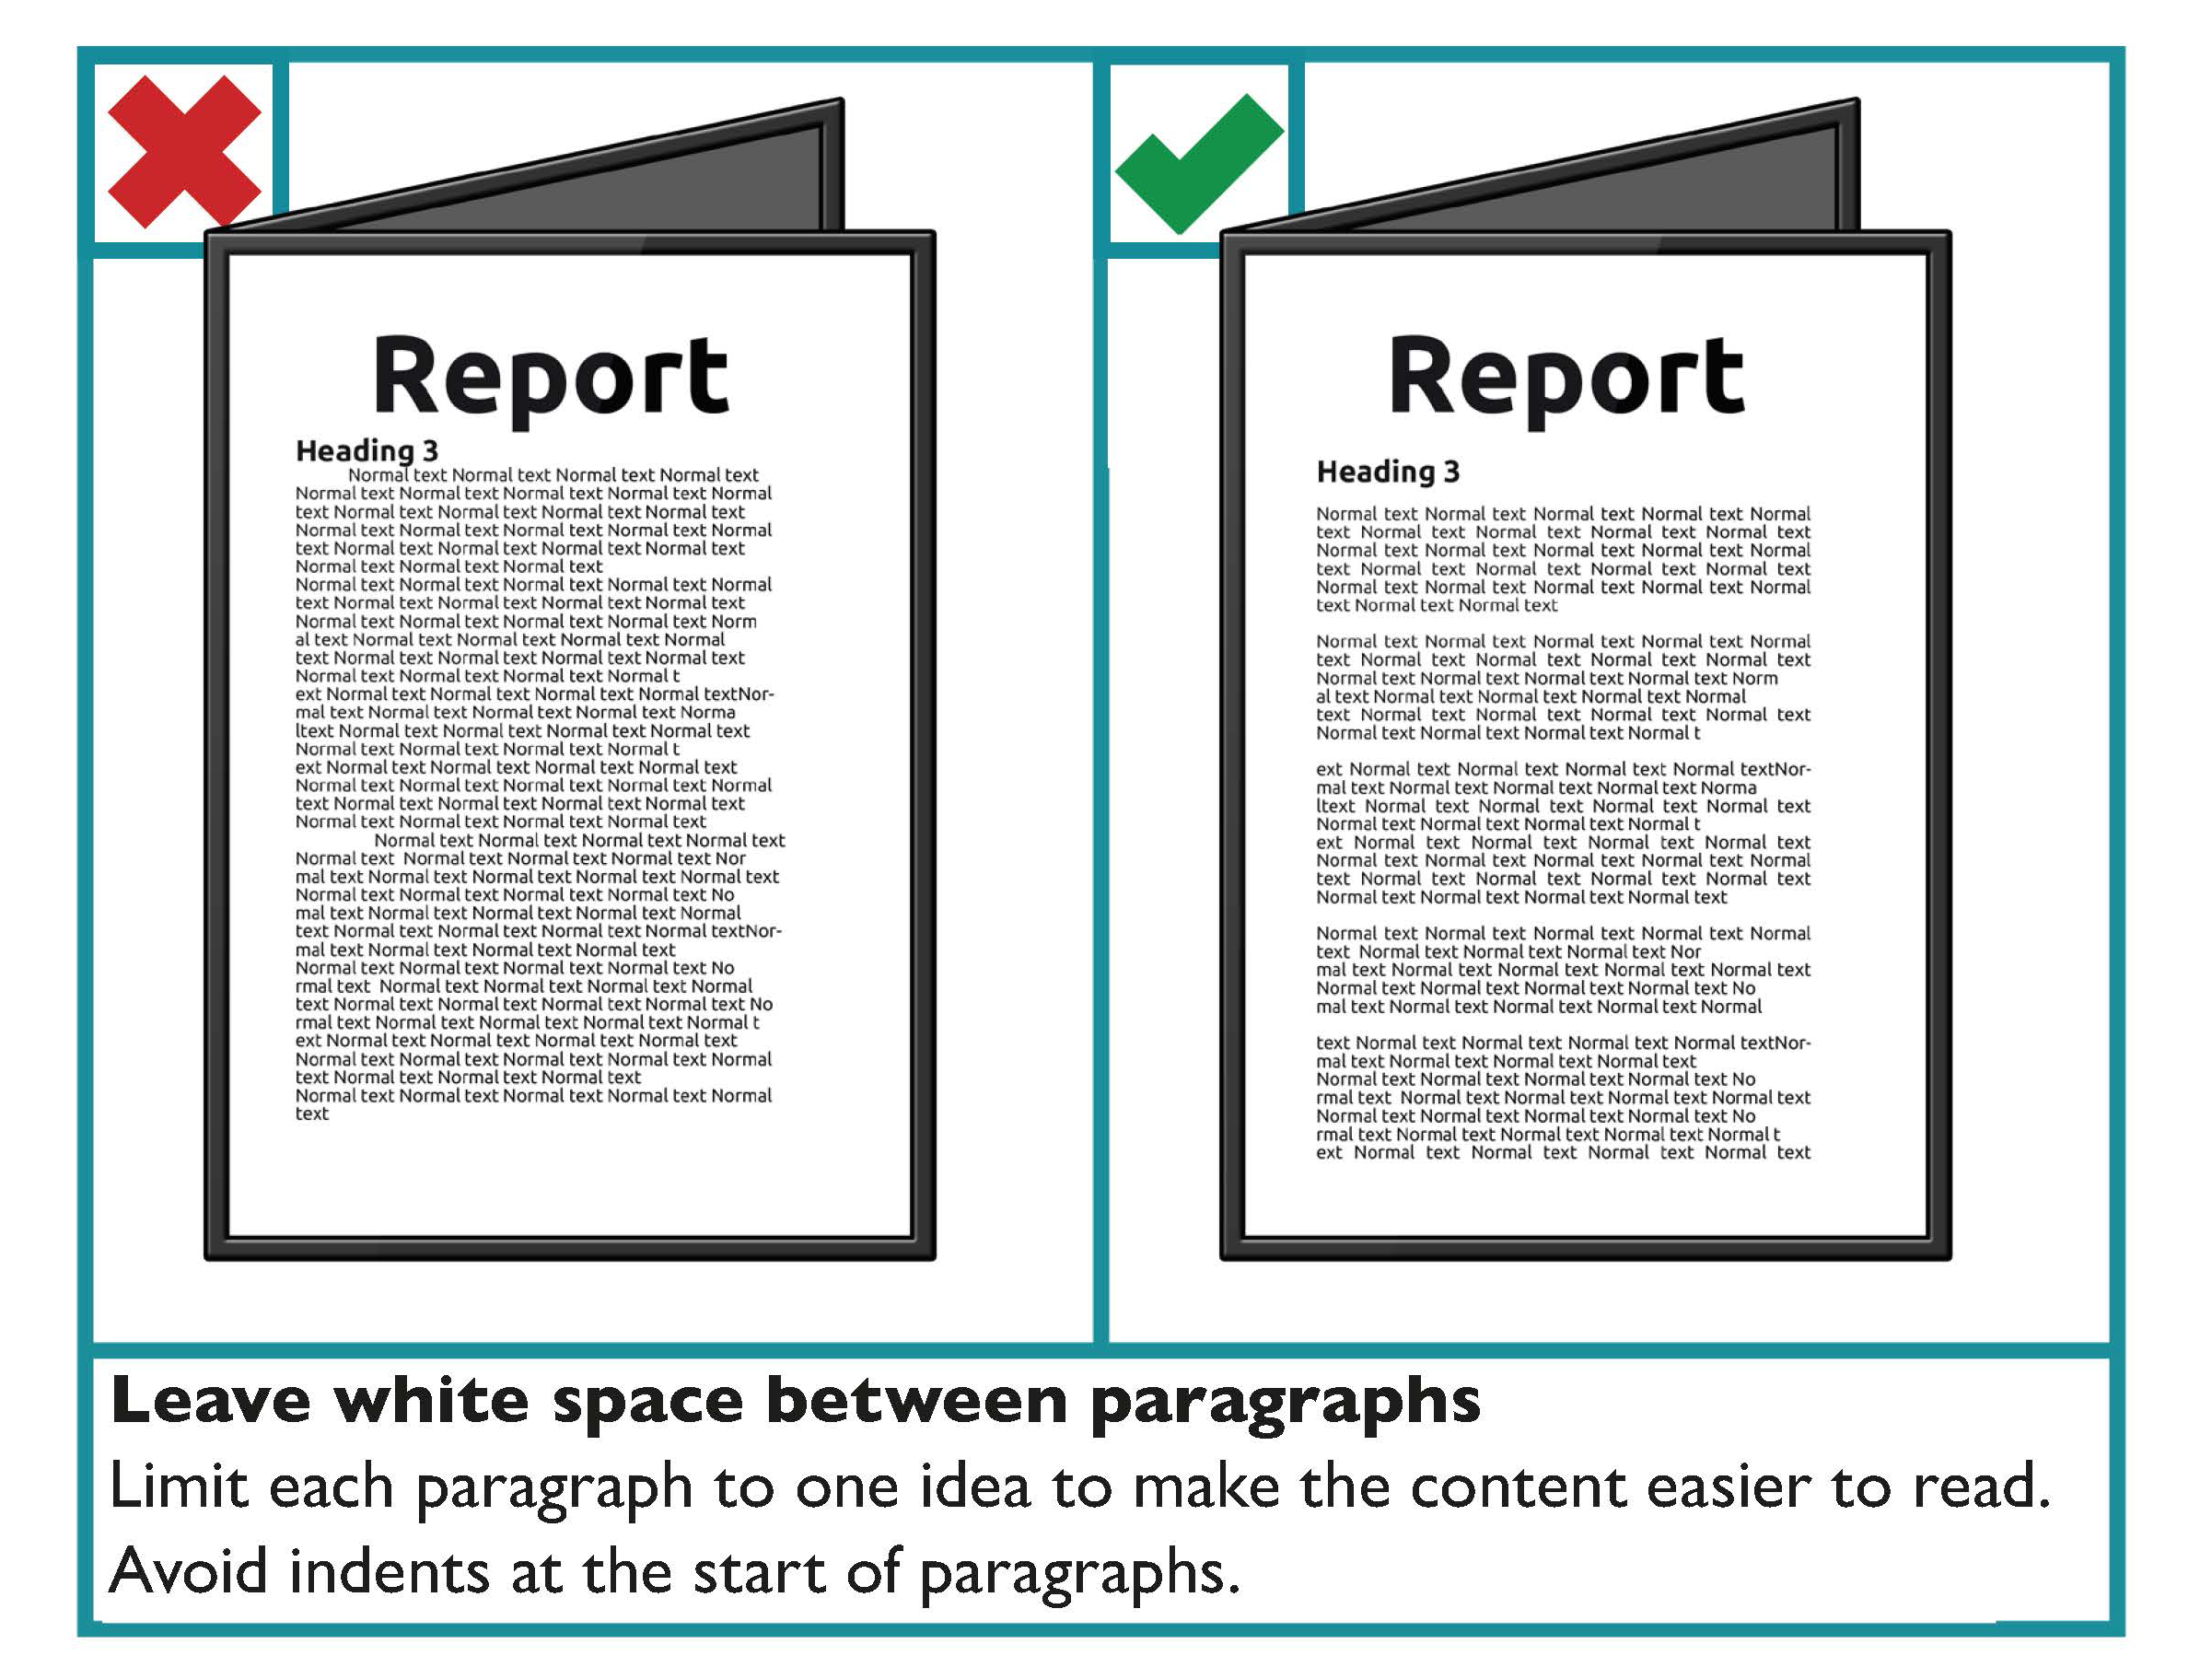 Example showing how leaving white space between paragraphs makes the content easier to read